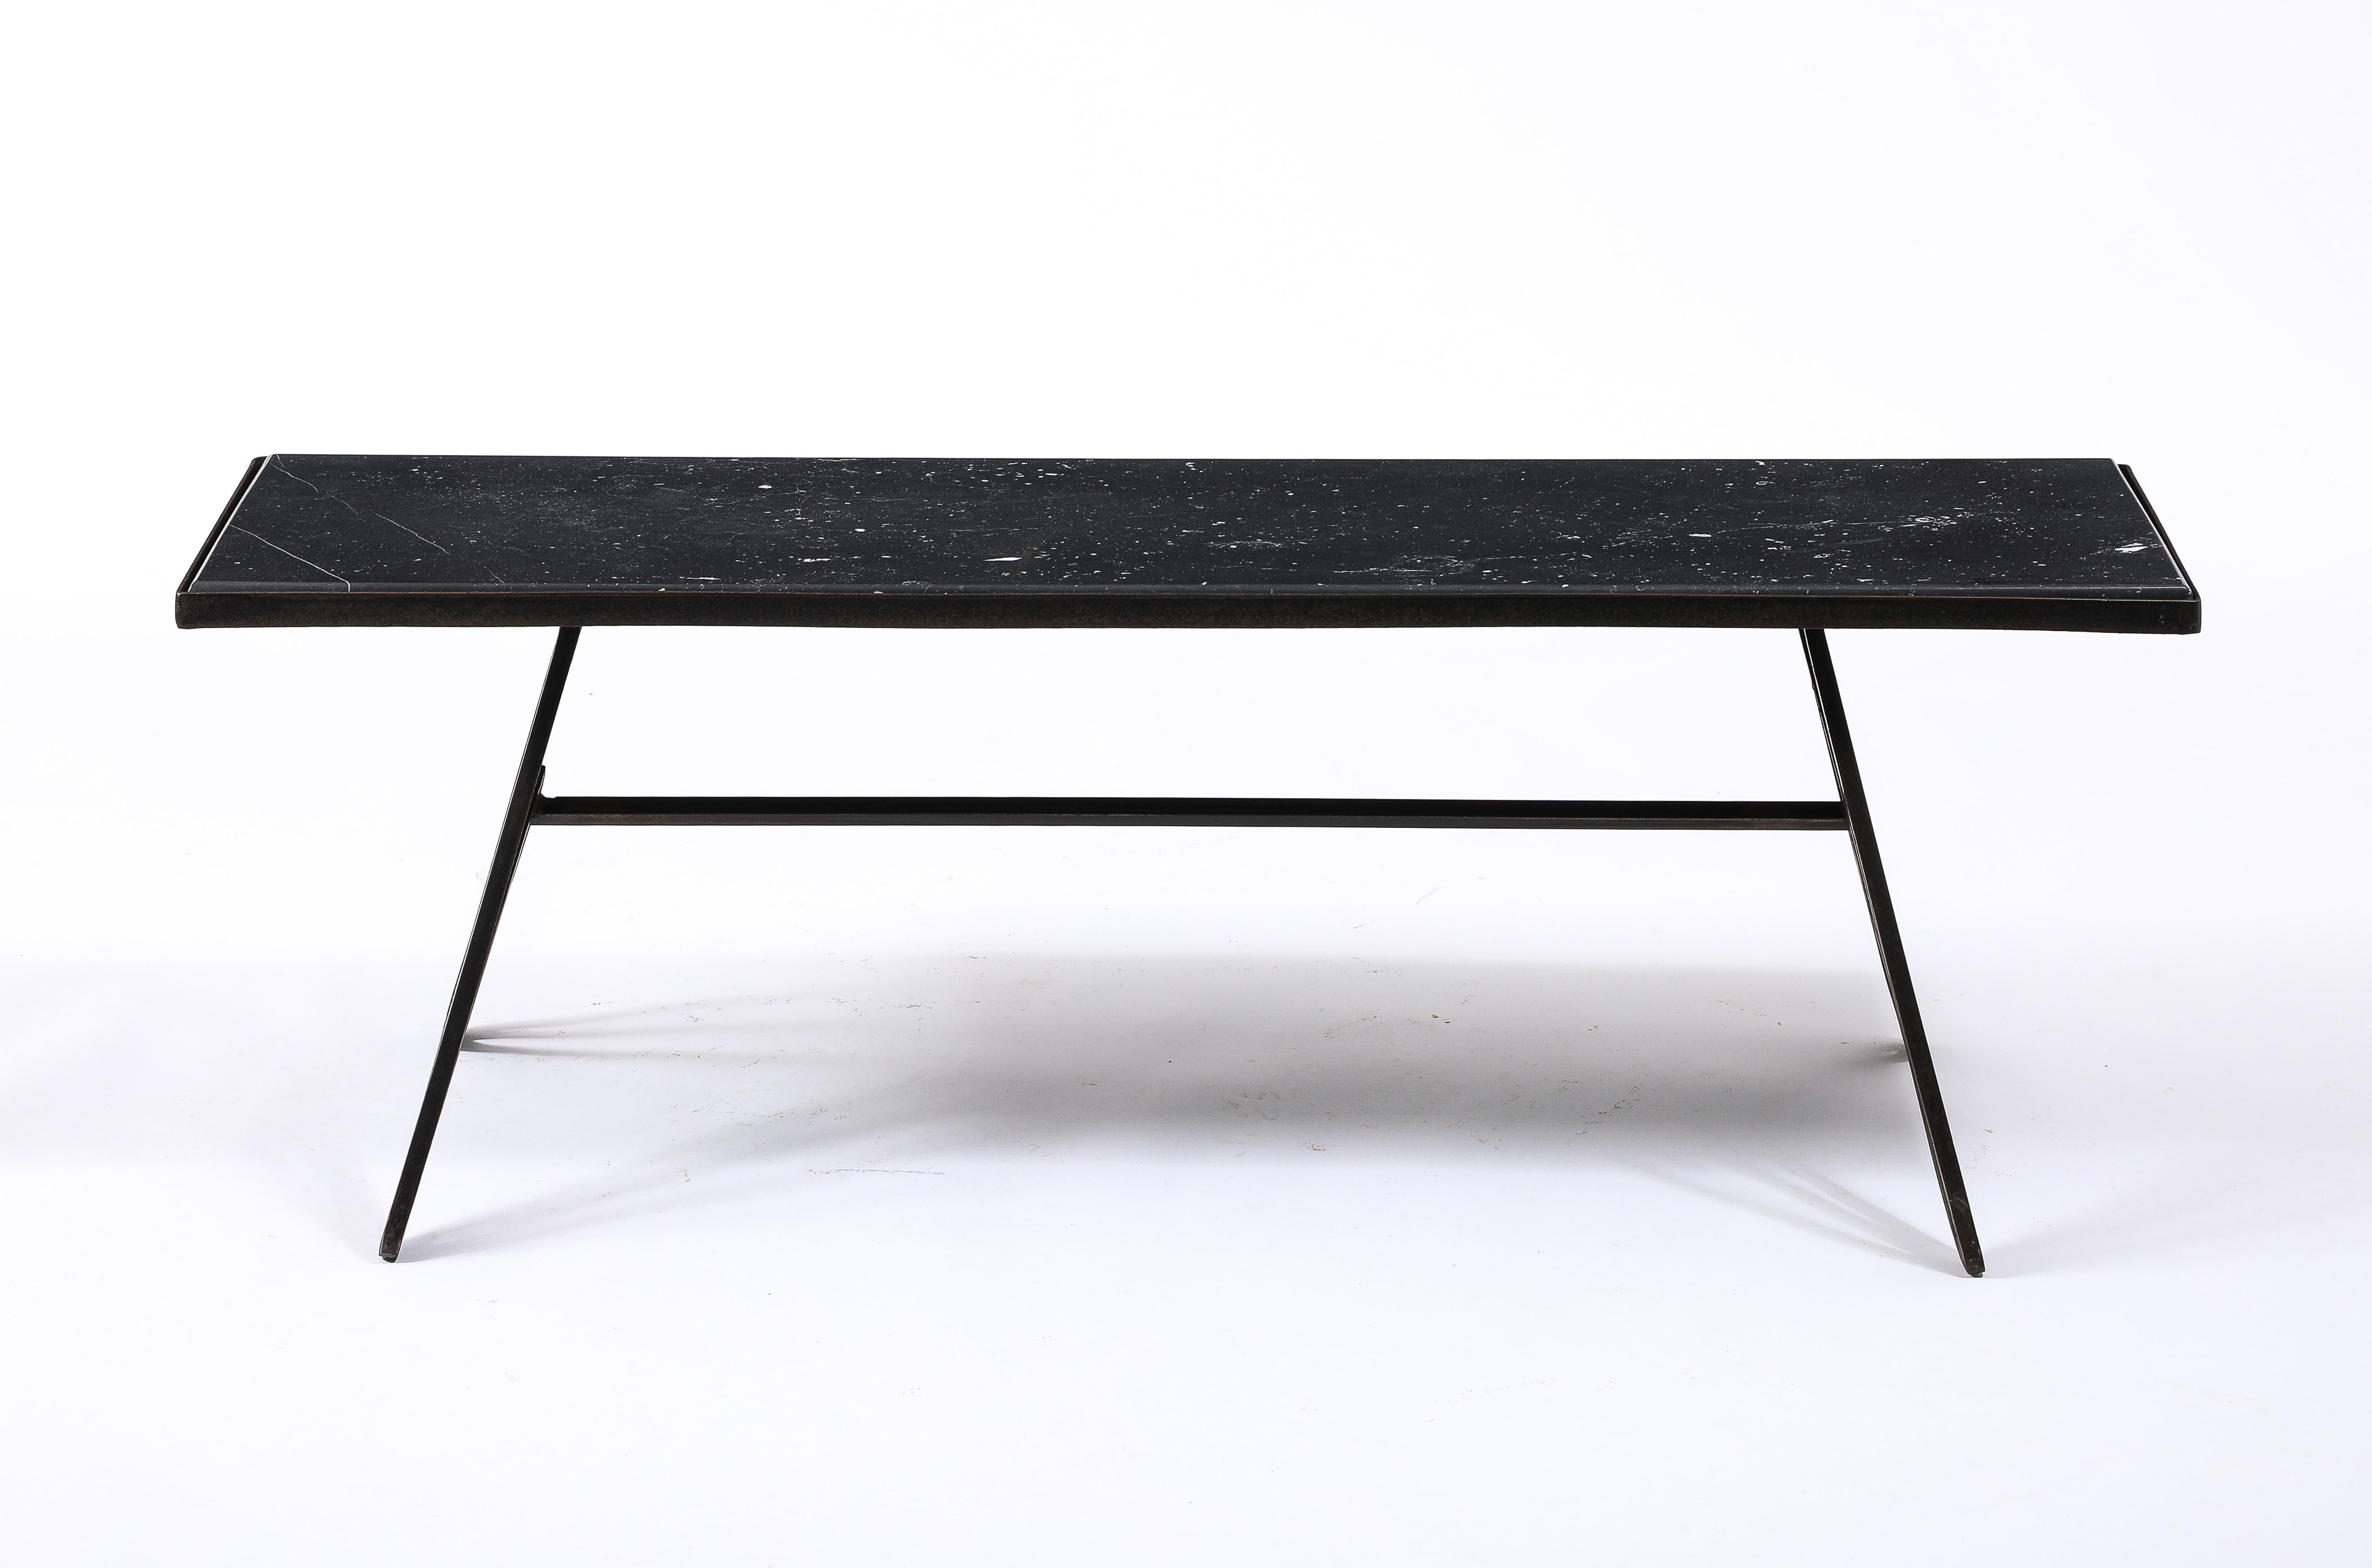 Honed Granite & Wrought Iron Coffee Table, France 1950's For Sale 7